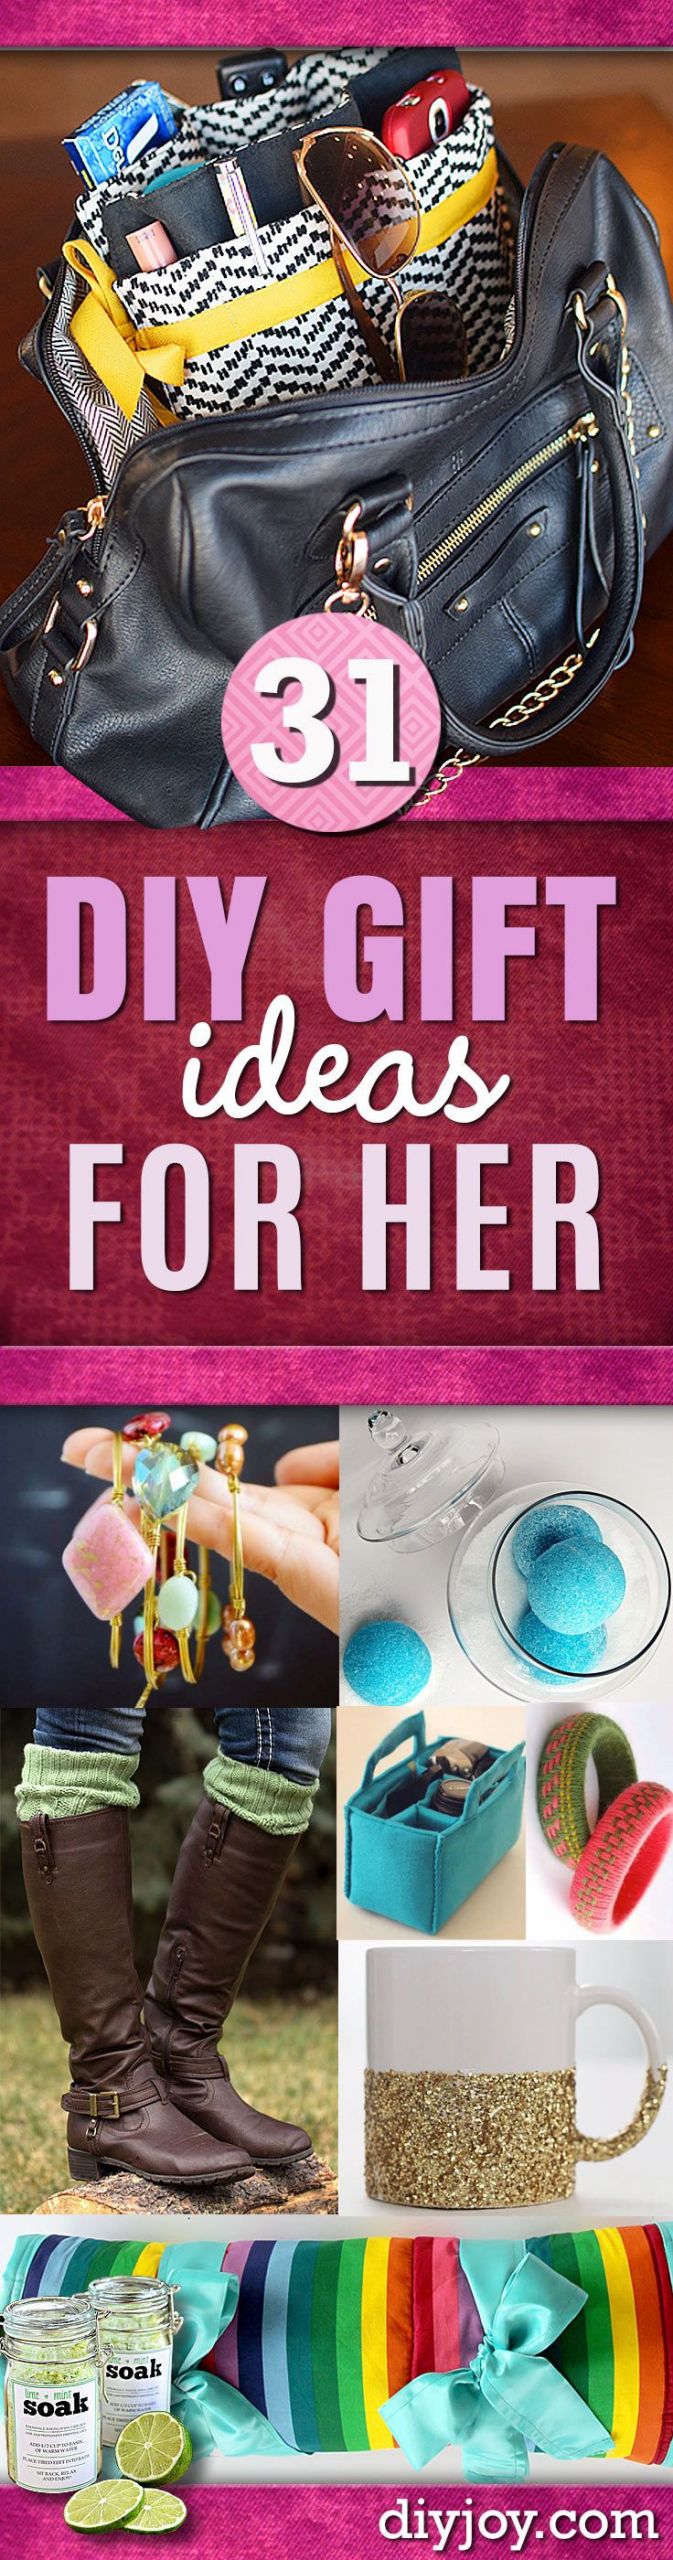 Small Gift Ideas For Girlfriend
 DIY Gift Ideas for Her